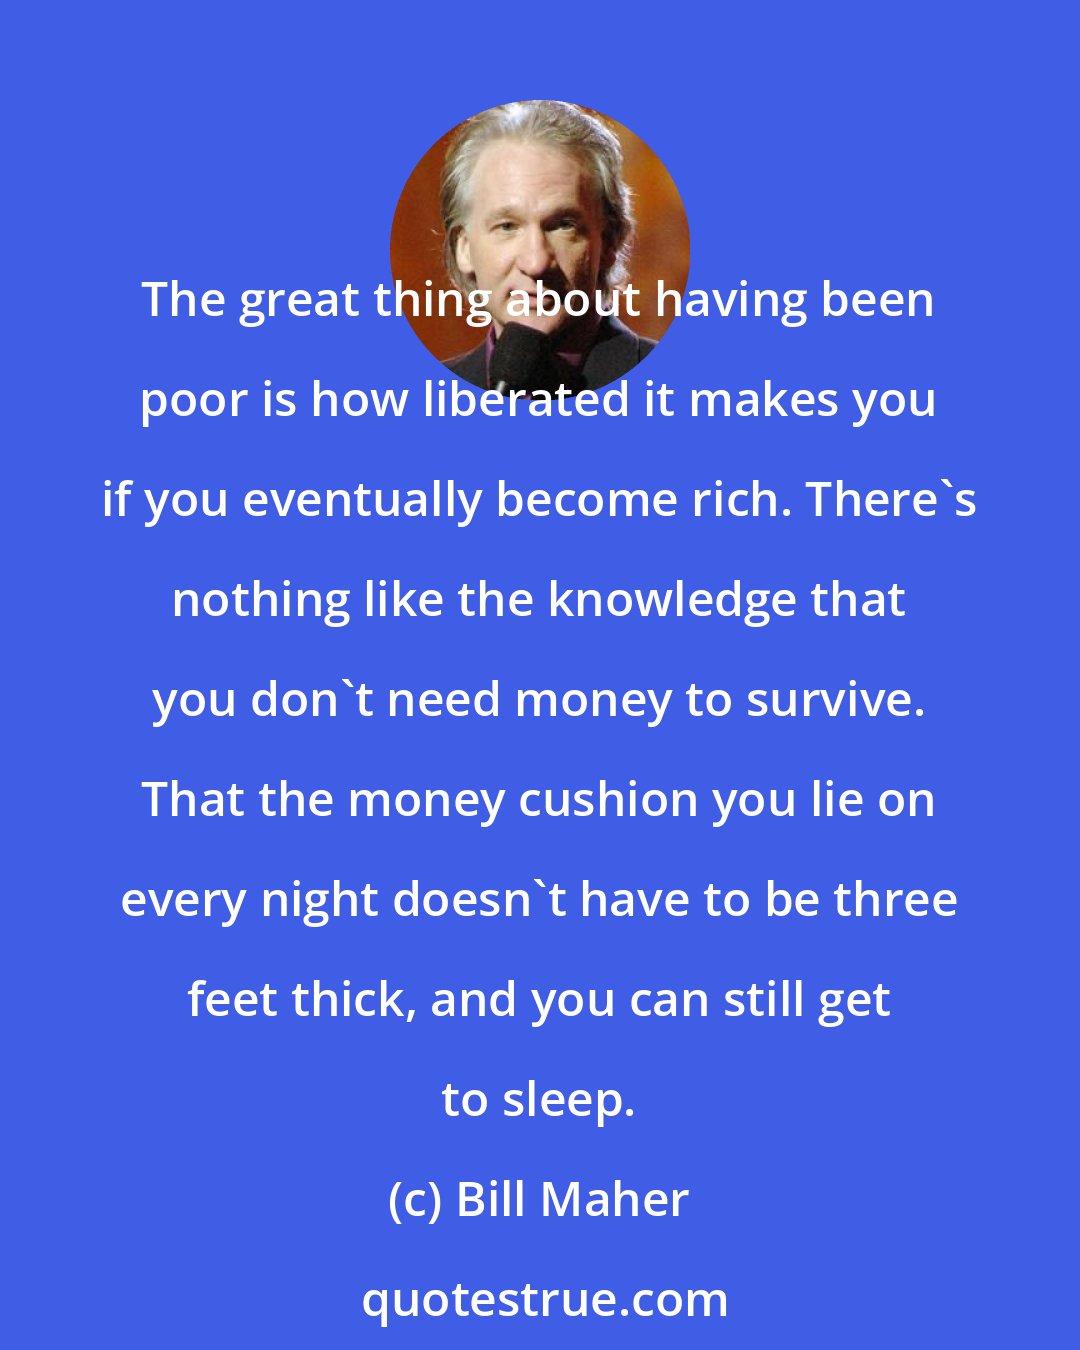 Bill Maher: The great thing about having been poor is how liberated it makes you if you eventually become rich. There's nothing like the knowledge that you don't need money to survive. That the money cushion you lie on every night doesn't have to be three feet thick, and you can still get to sleep.